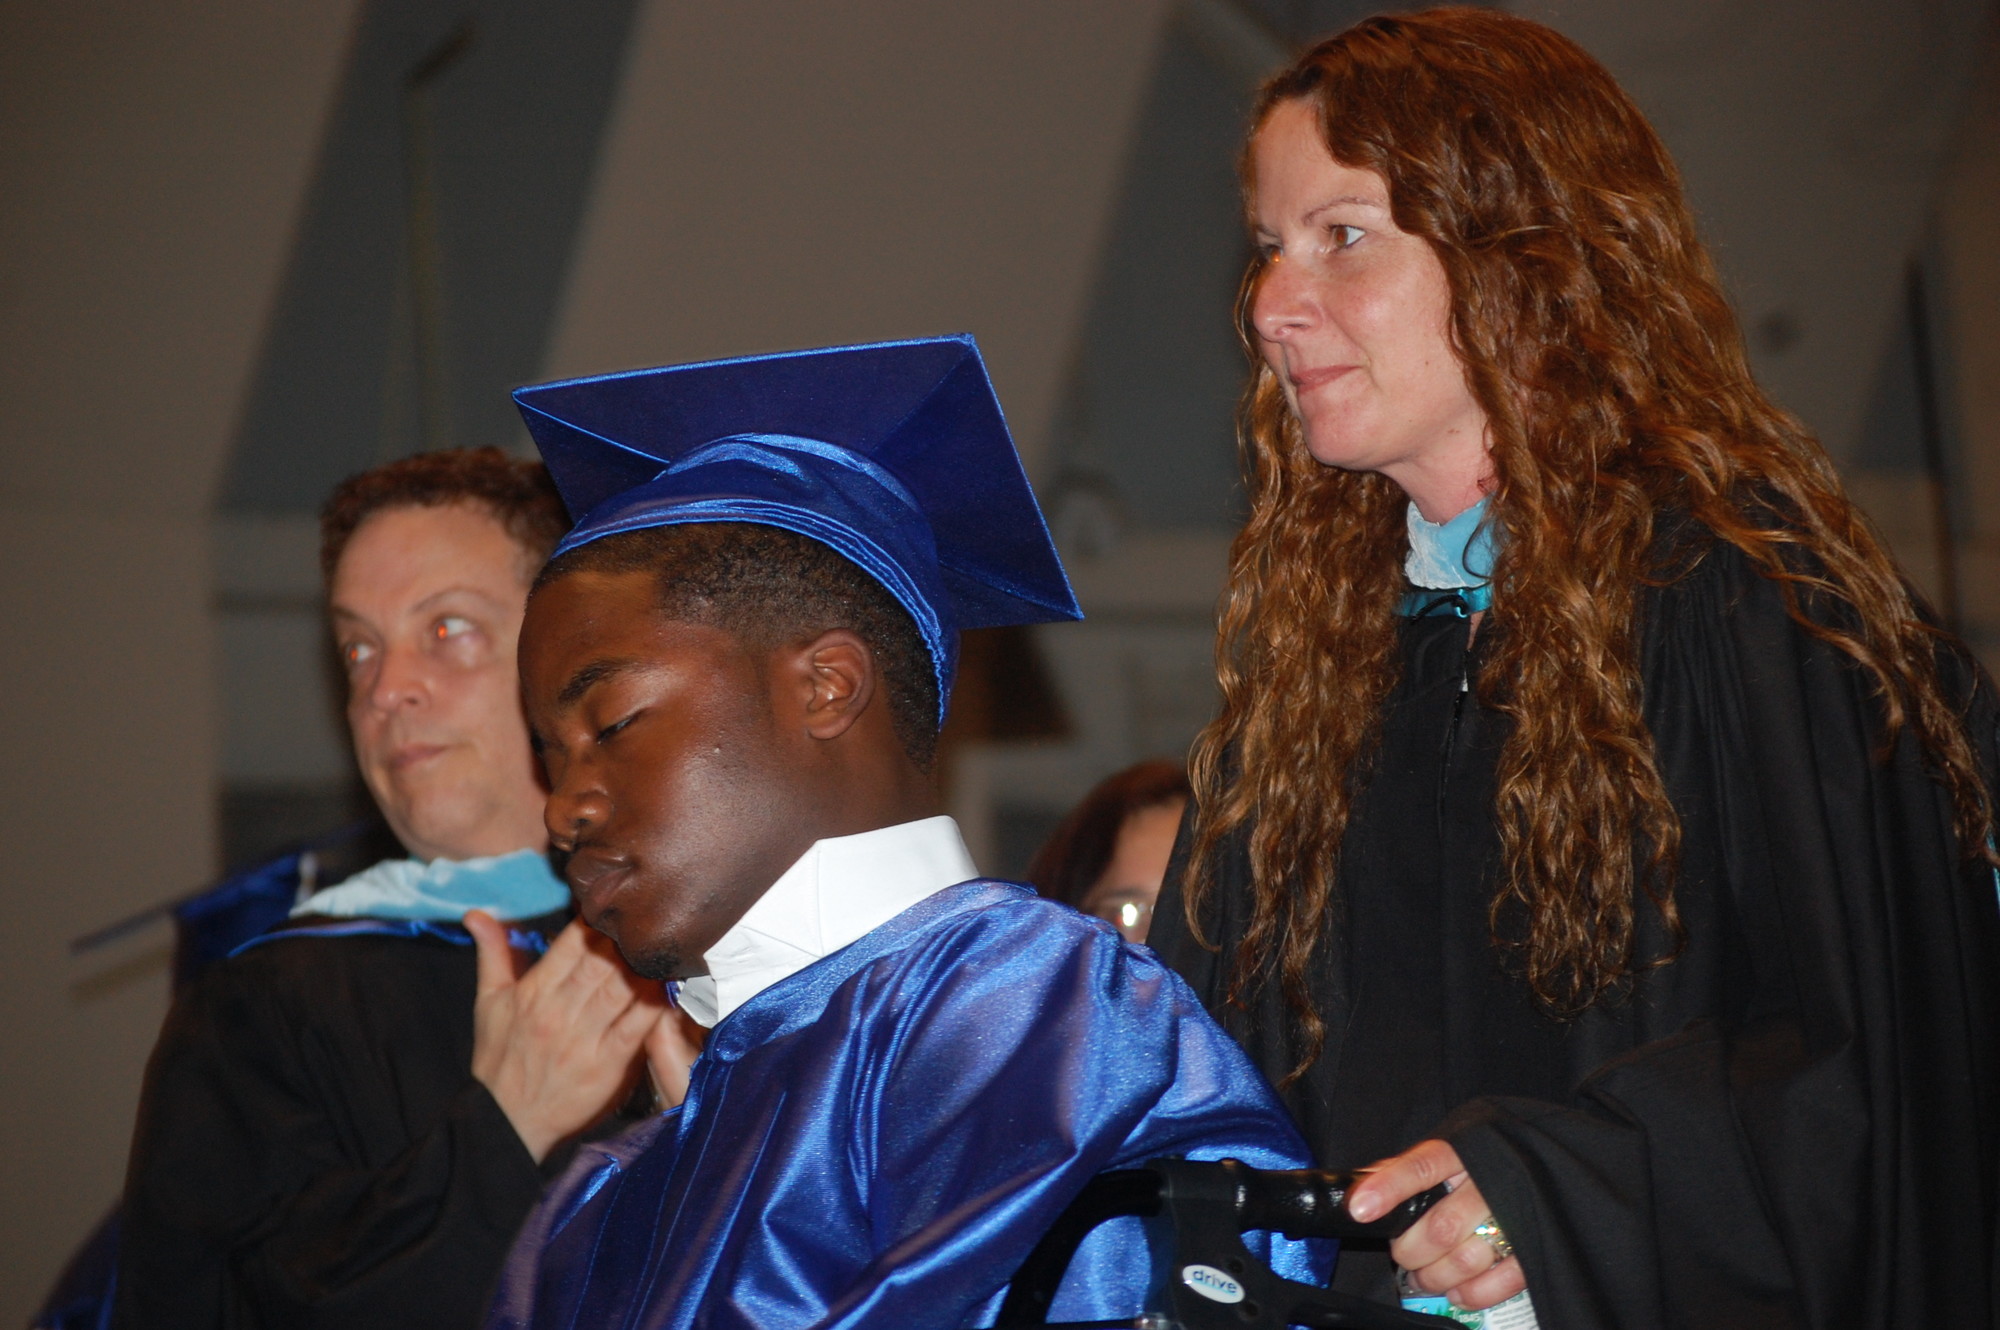 Jurell WIlson was helped by guidance counselor Kathy Hardy to receive his diploma on June 25.